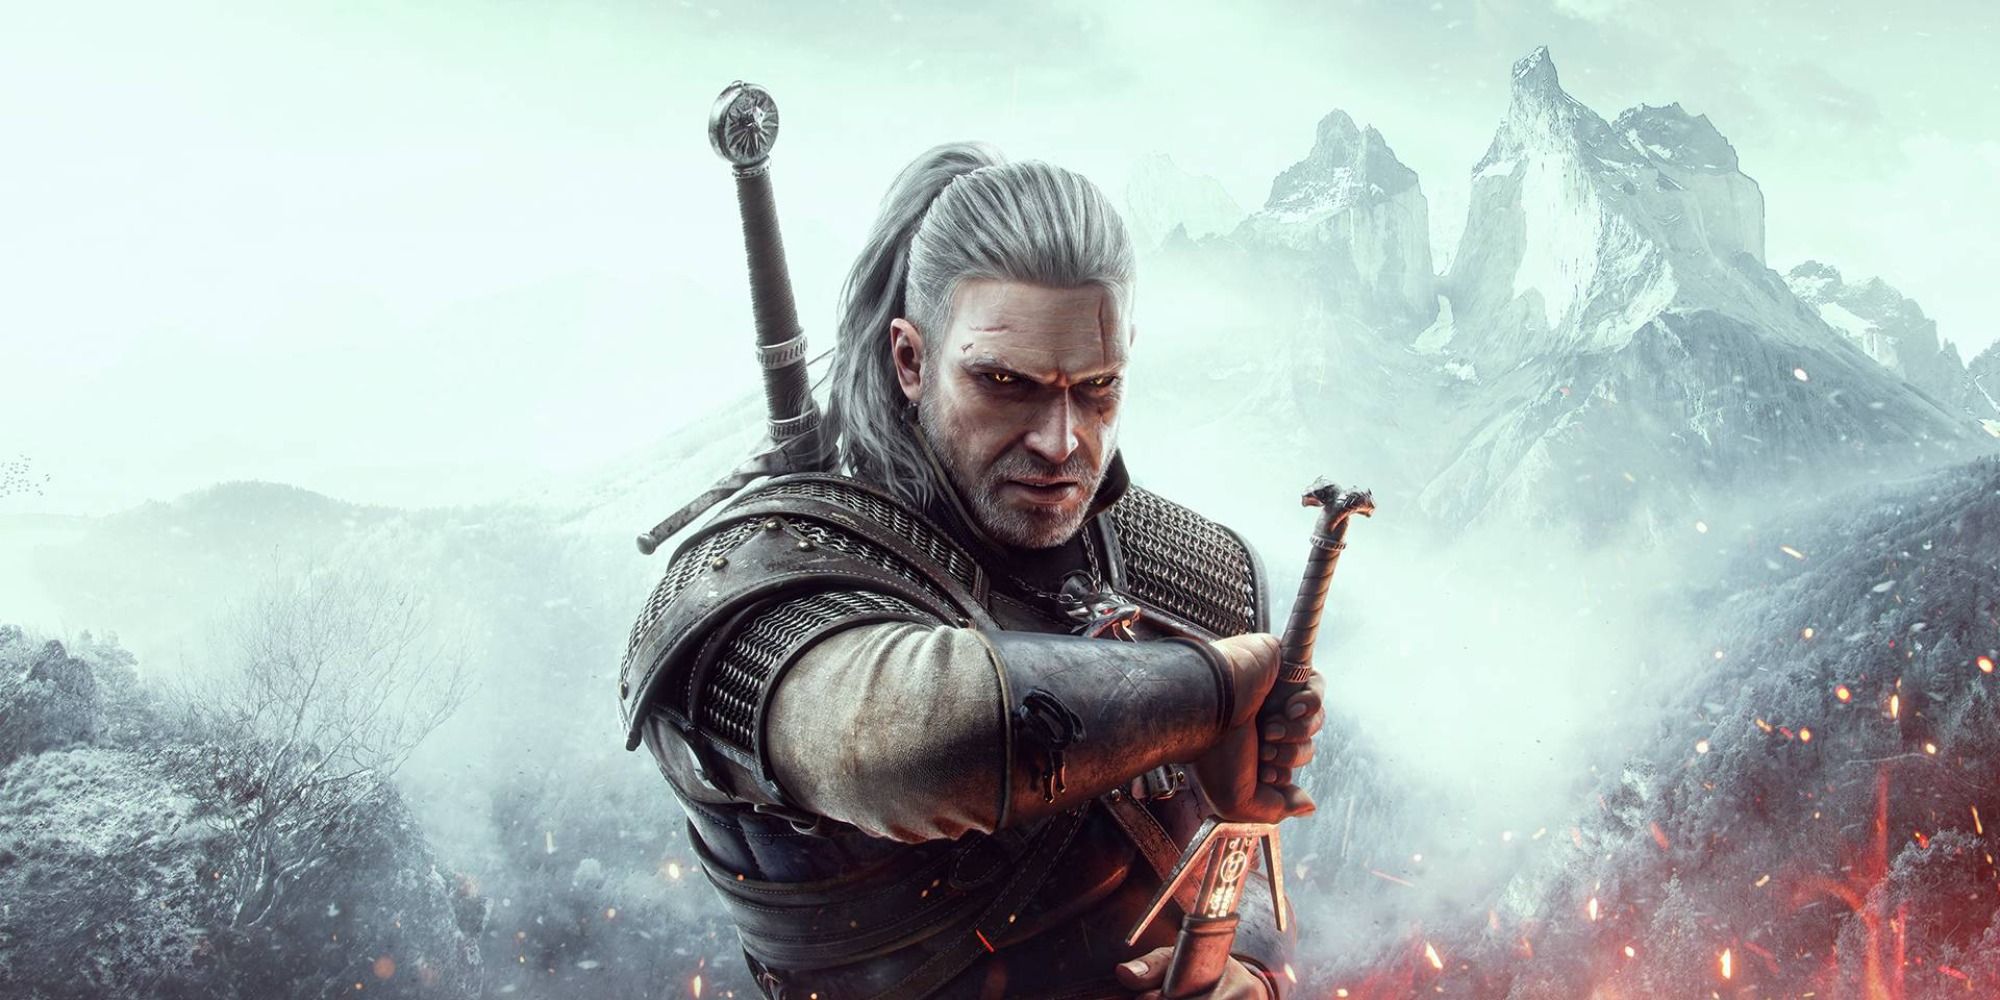 Geralt of Rivia should be able to survive jumping off a chest-high wall. 